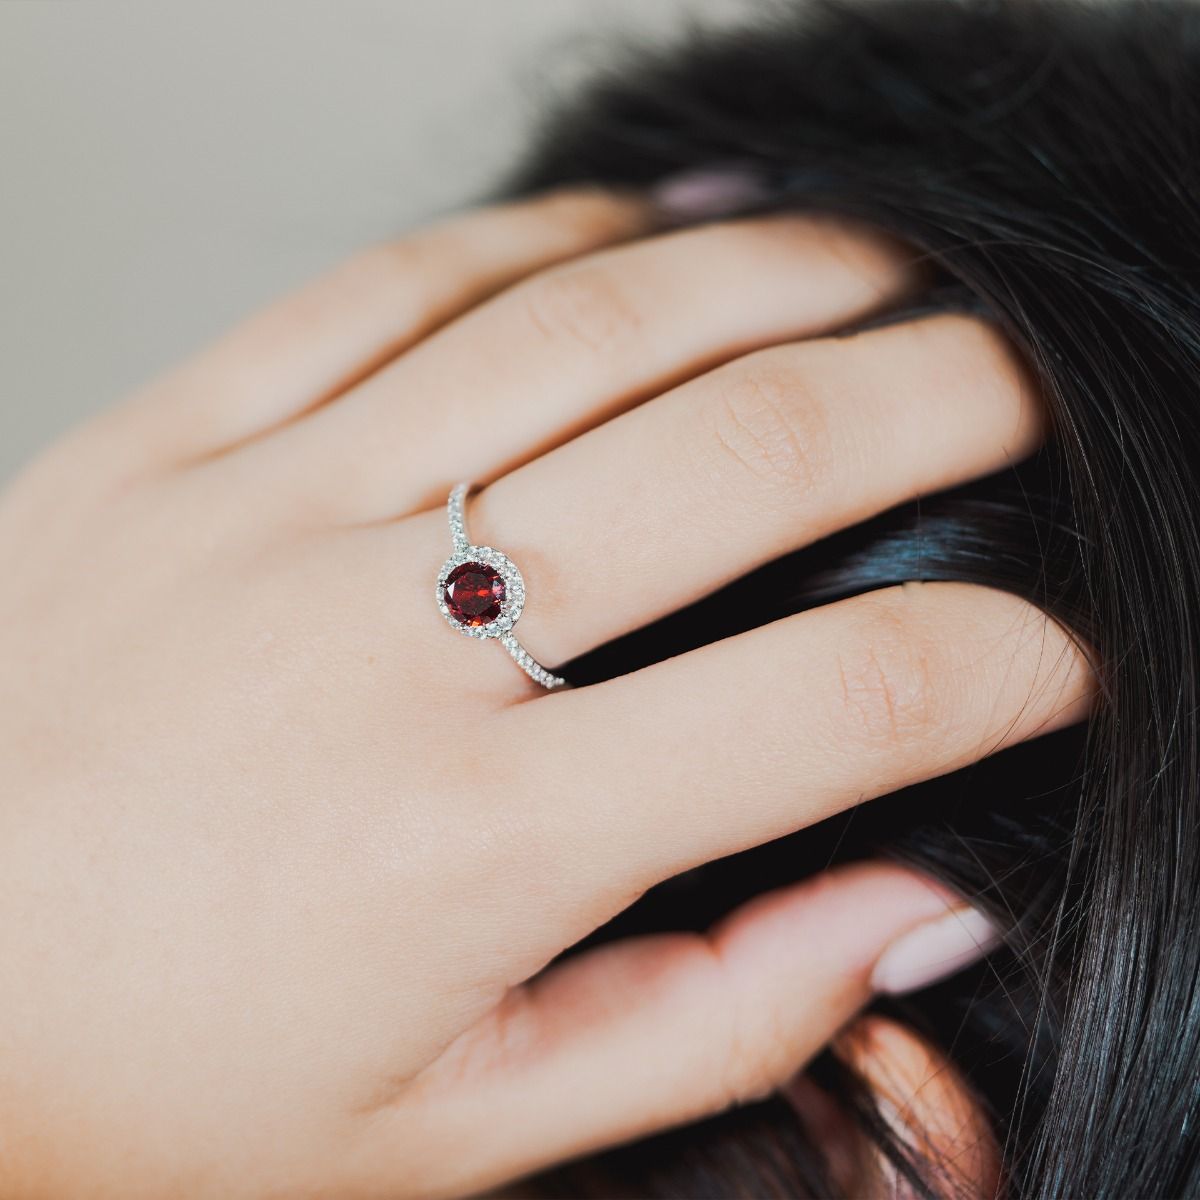 Make a statement with this stunning brilliant cut Ruby Halo Ring. Delicately surrounded with a halo of sparkling glass stones surrounding the centre stone and down the band, creating a dramatic, elegant look.